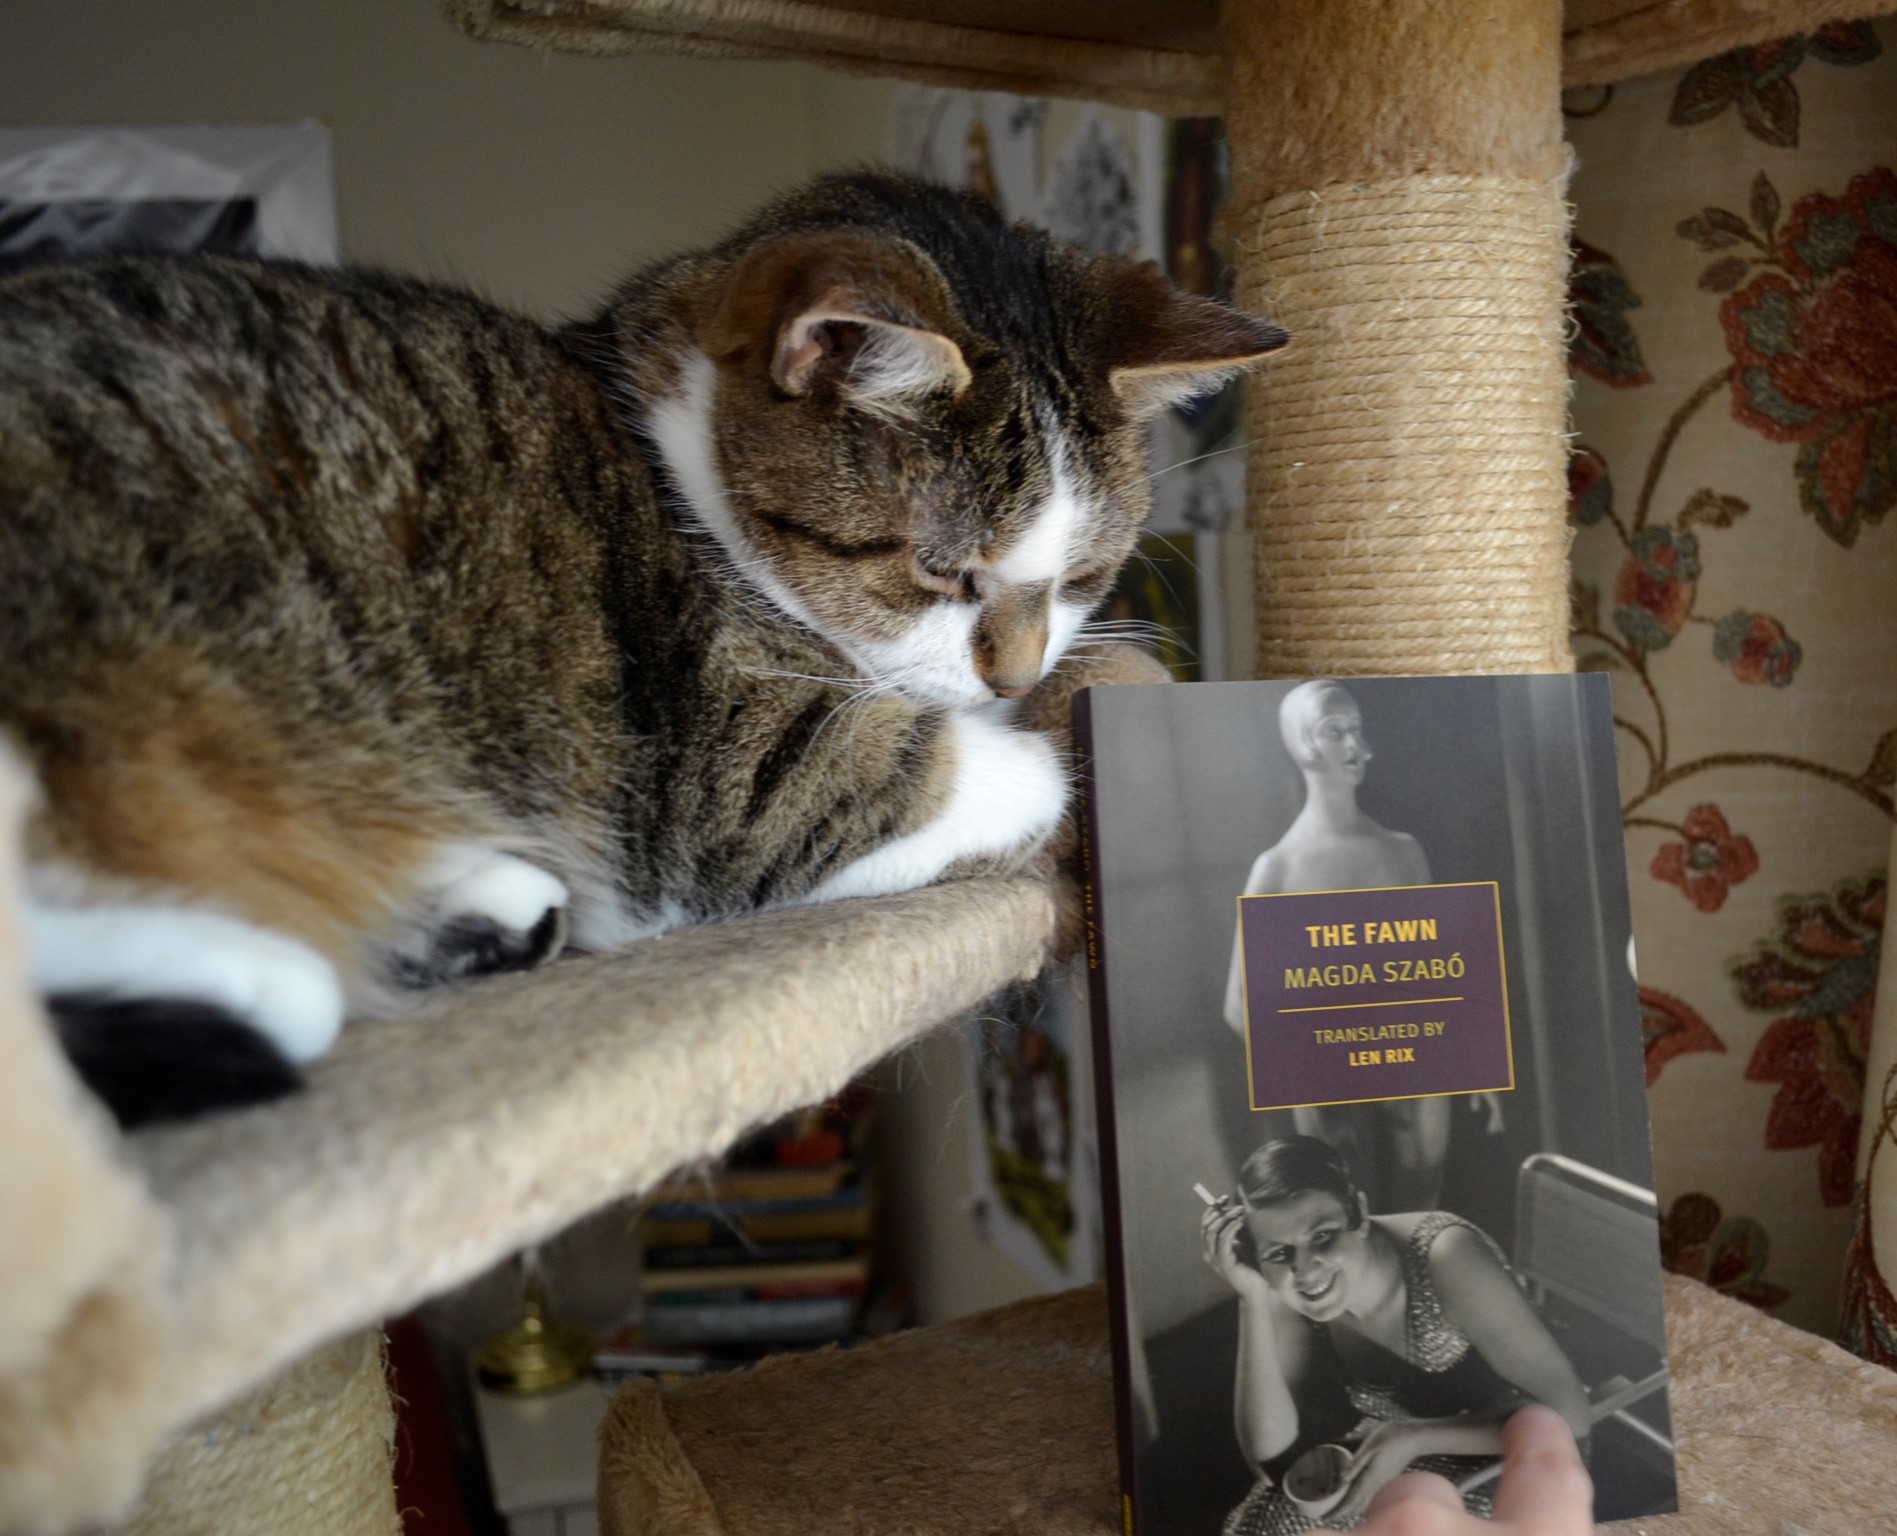 Magda Szabo's The Fawn leans on the pillar of a cat tree, beside a tabby cat.